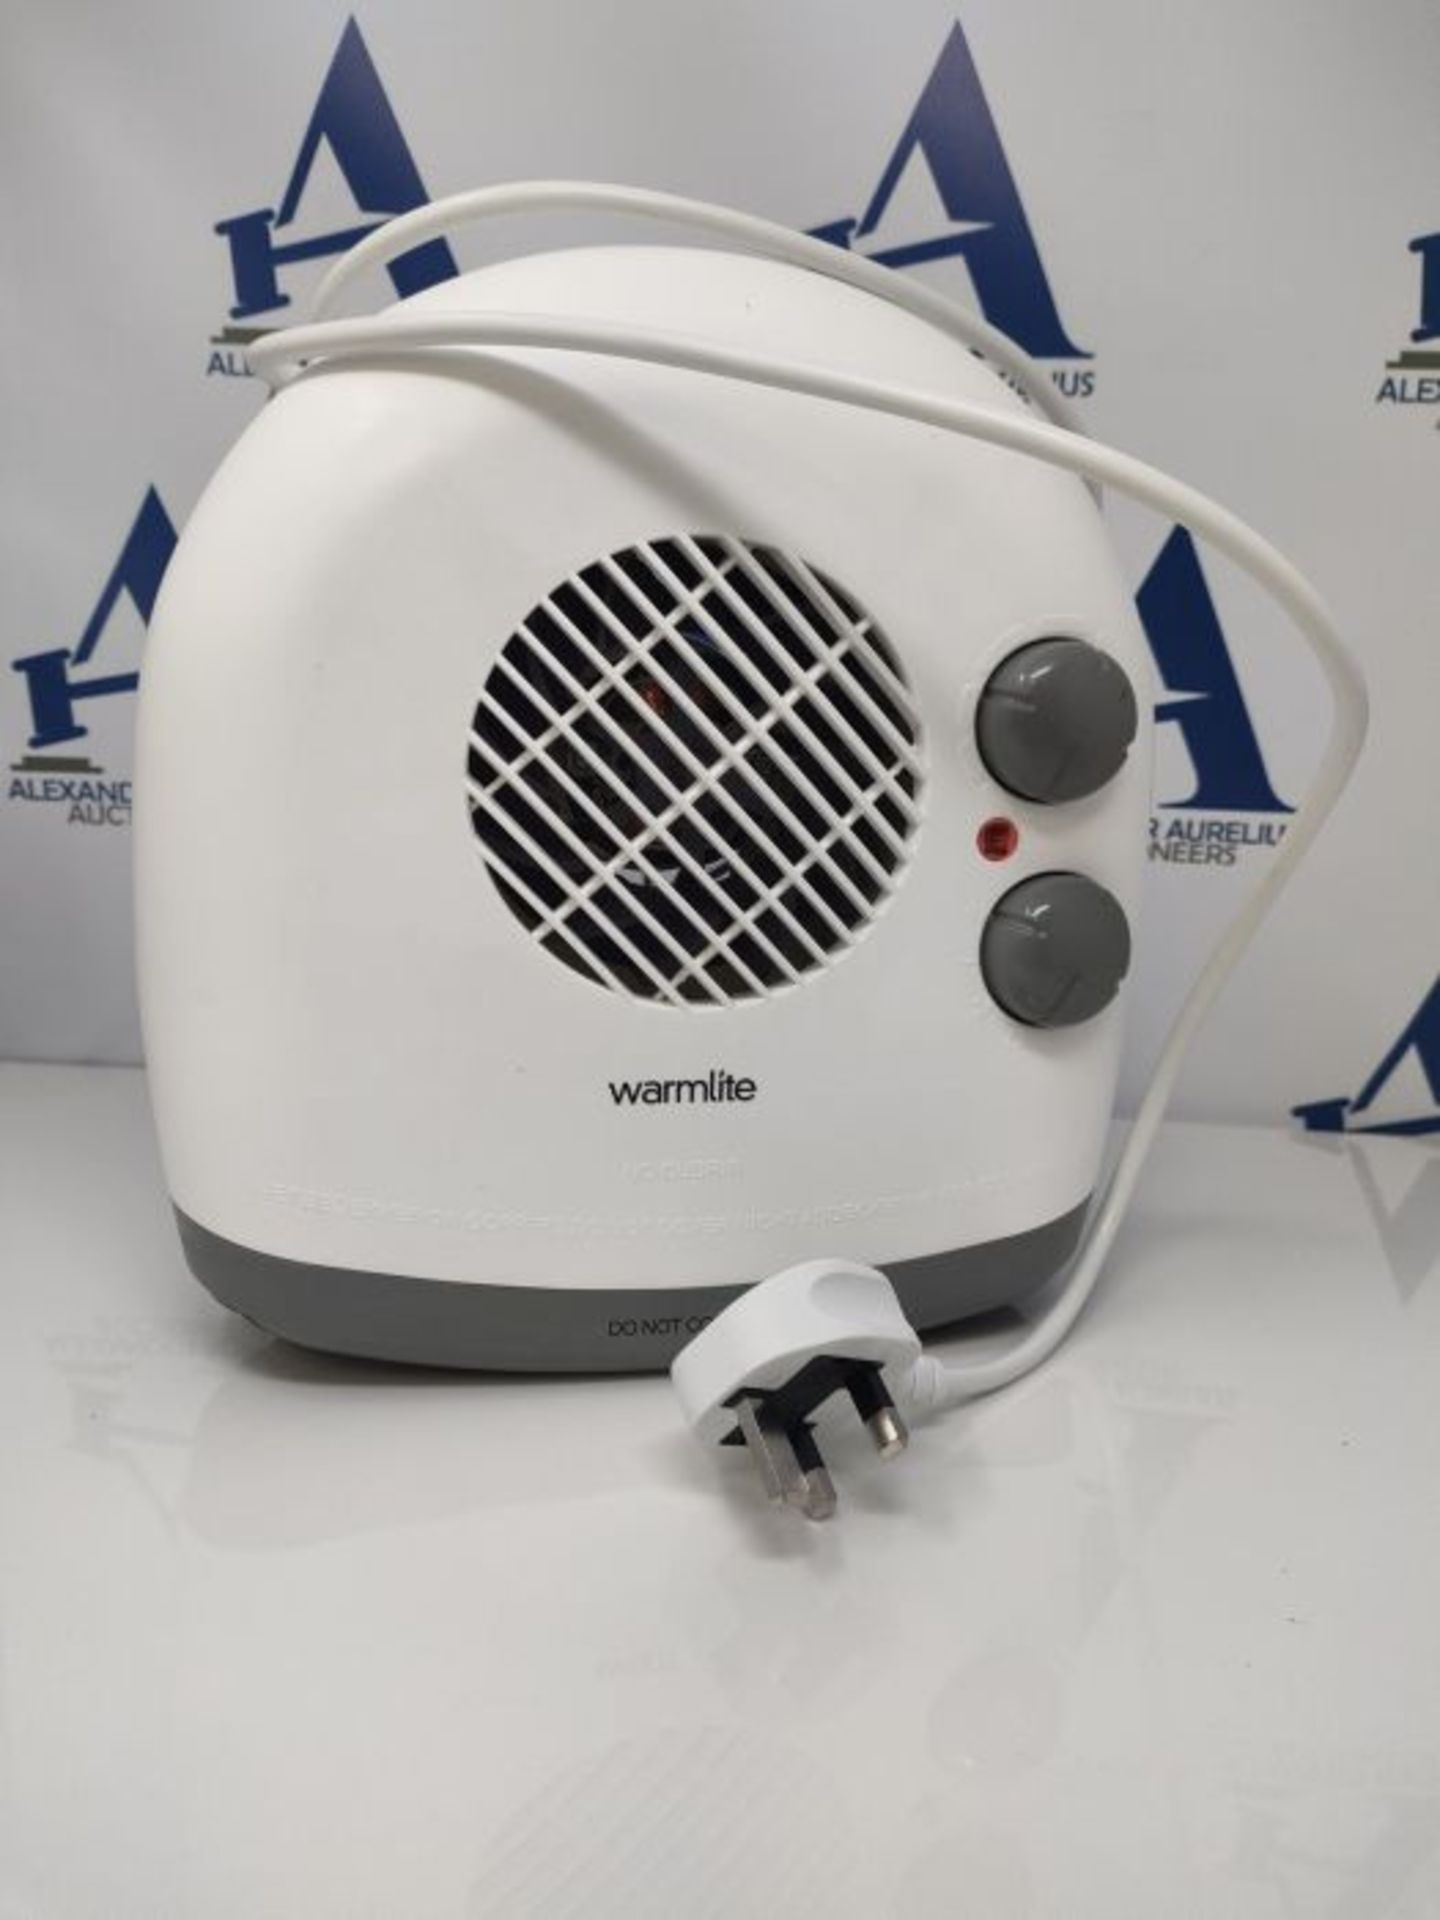 Warmlite WL44004 2000W Portable Flat Fan Heater with 2 Heat Settings and Overheat Prot - Image 2 of 2